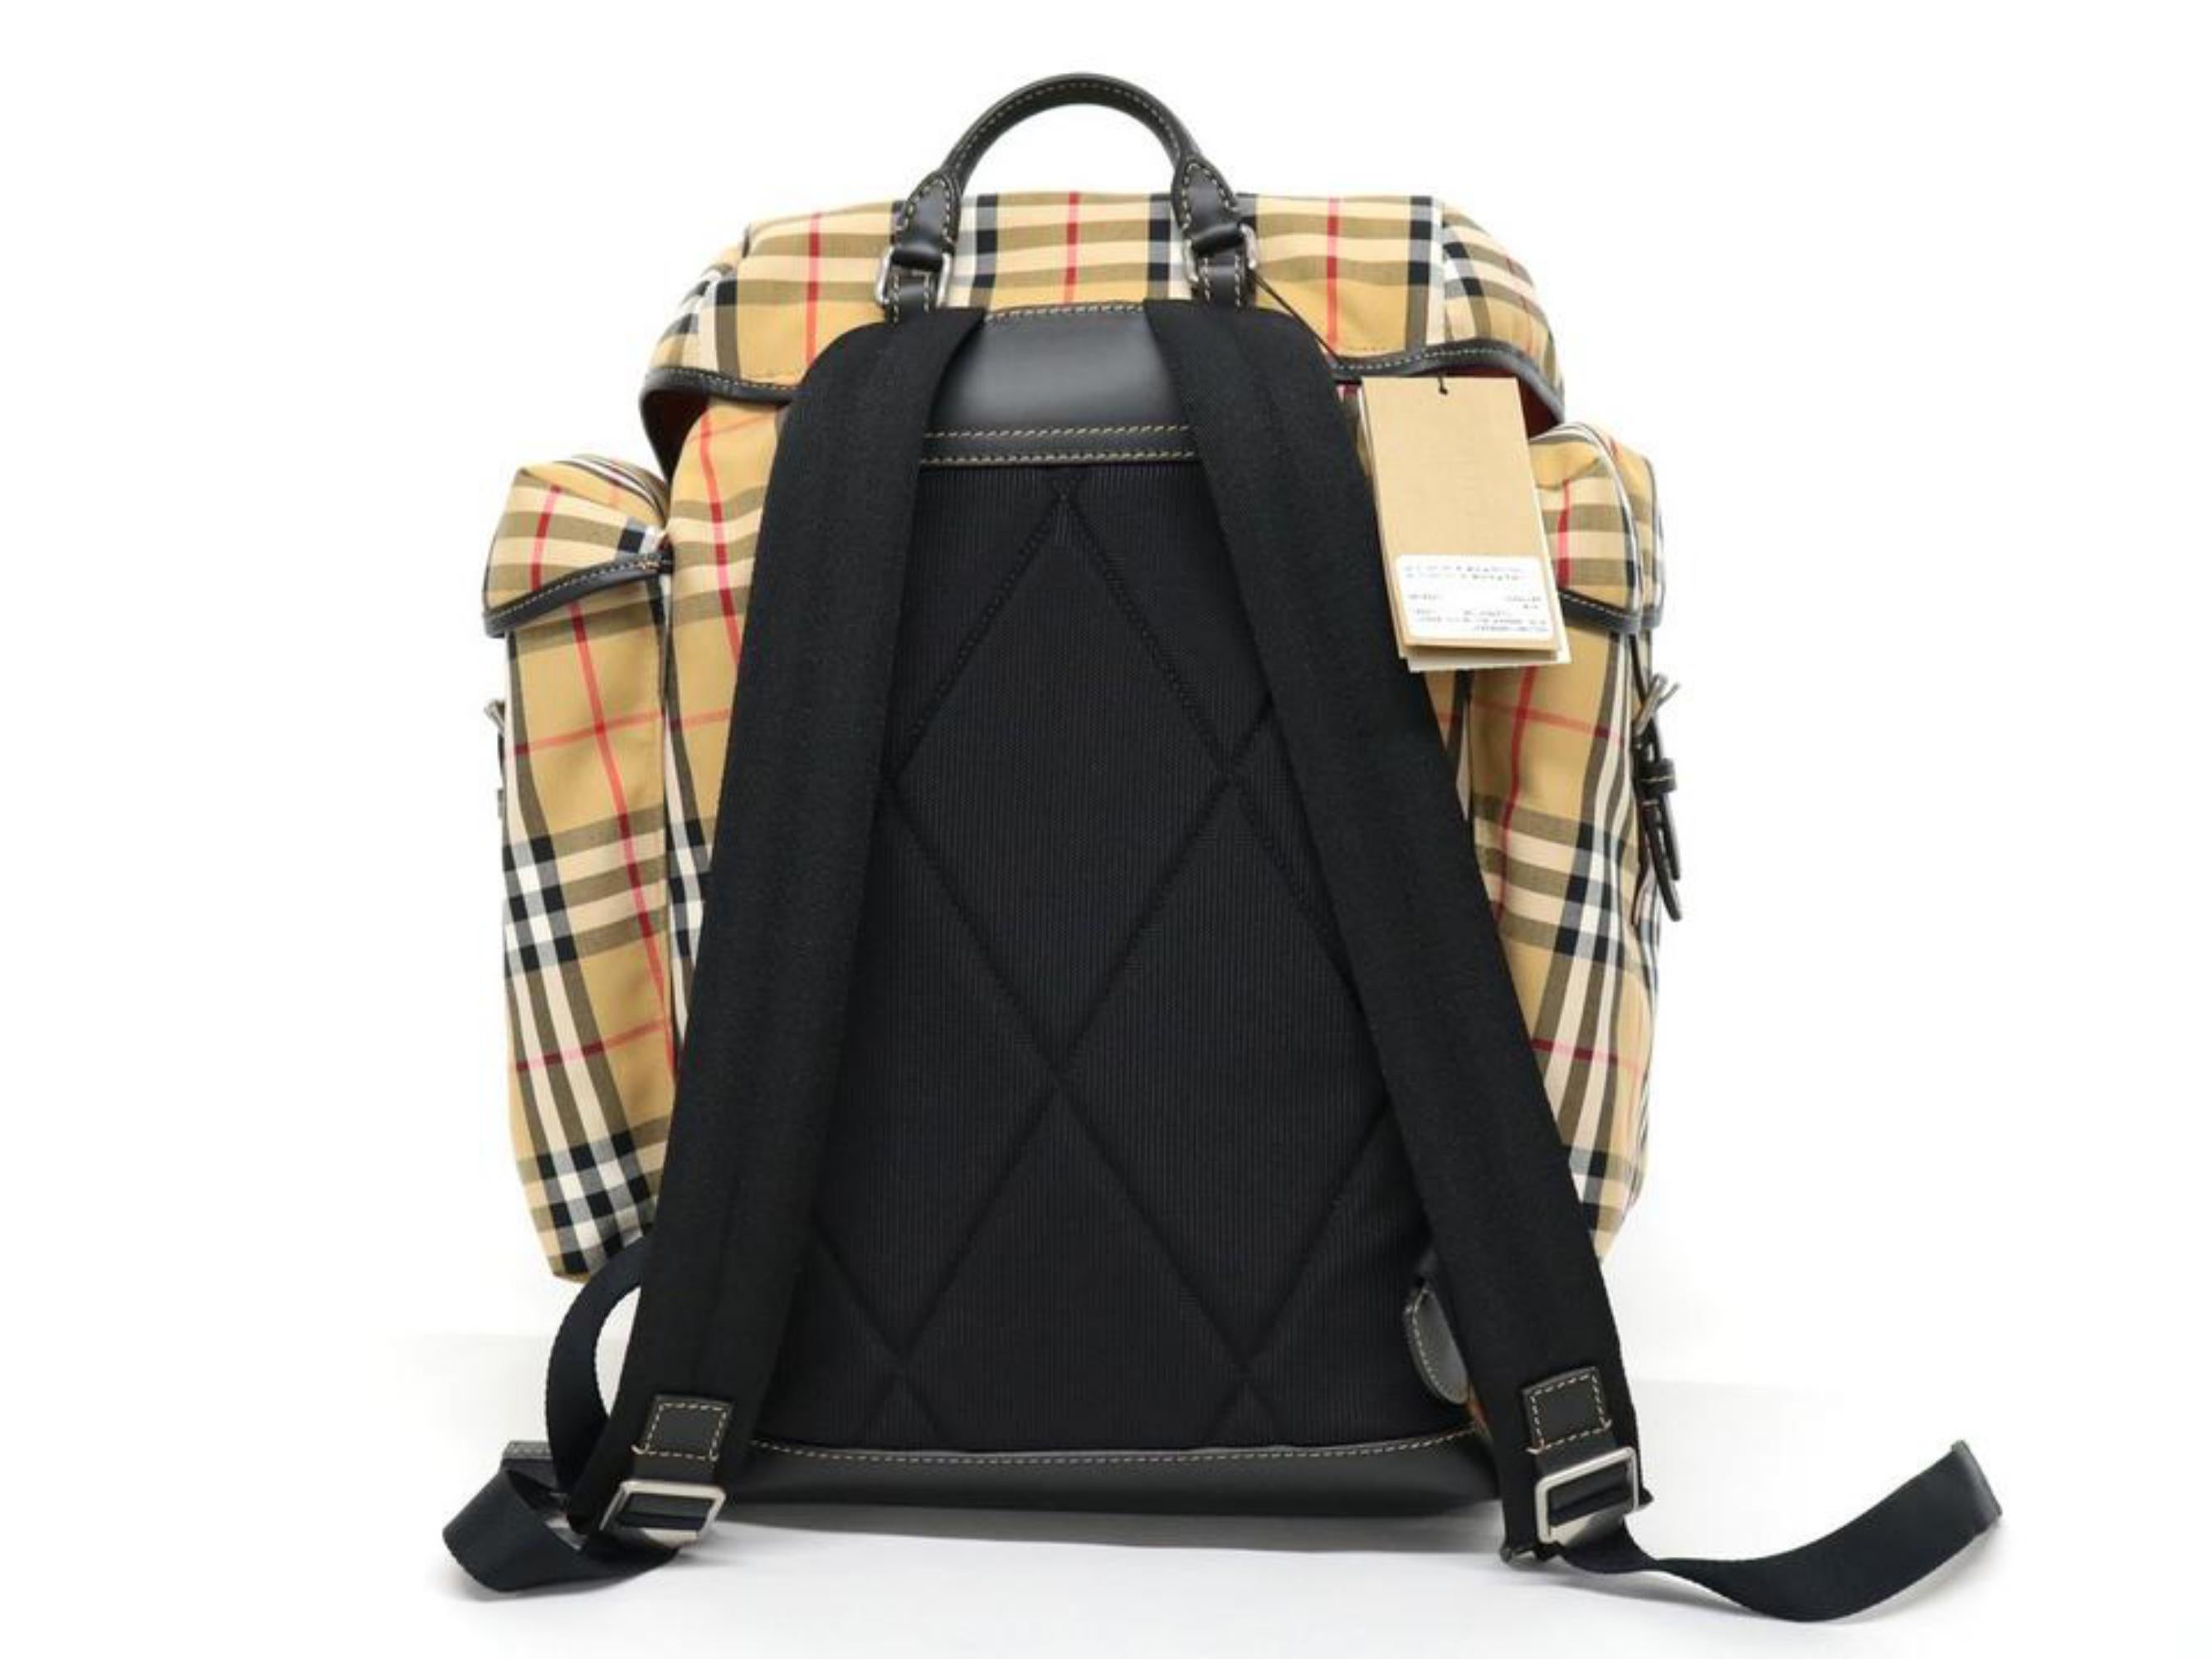 Burberry Classic Beige Nova Check Explorer Backpack 241537 For Sale at ...